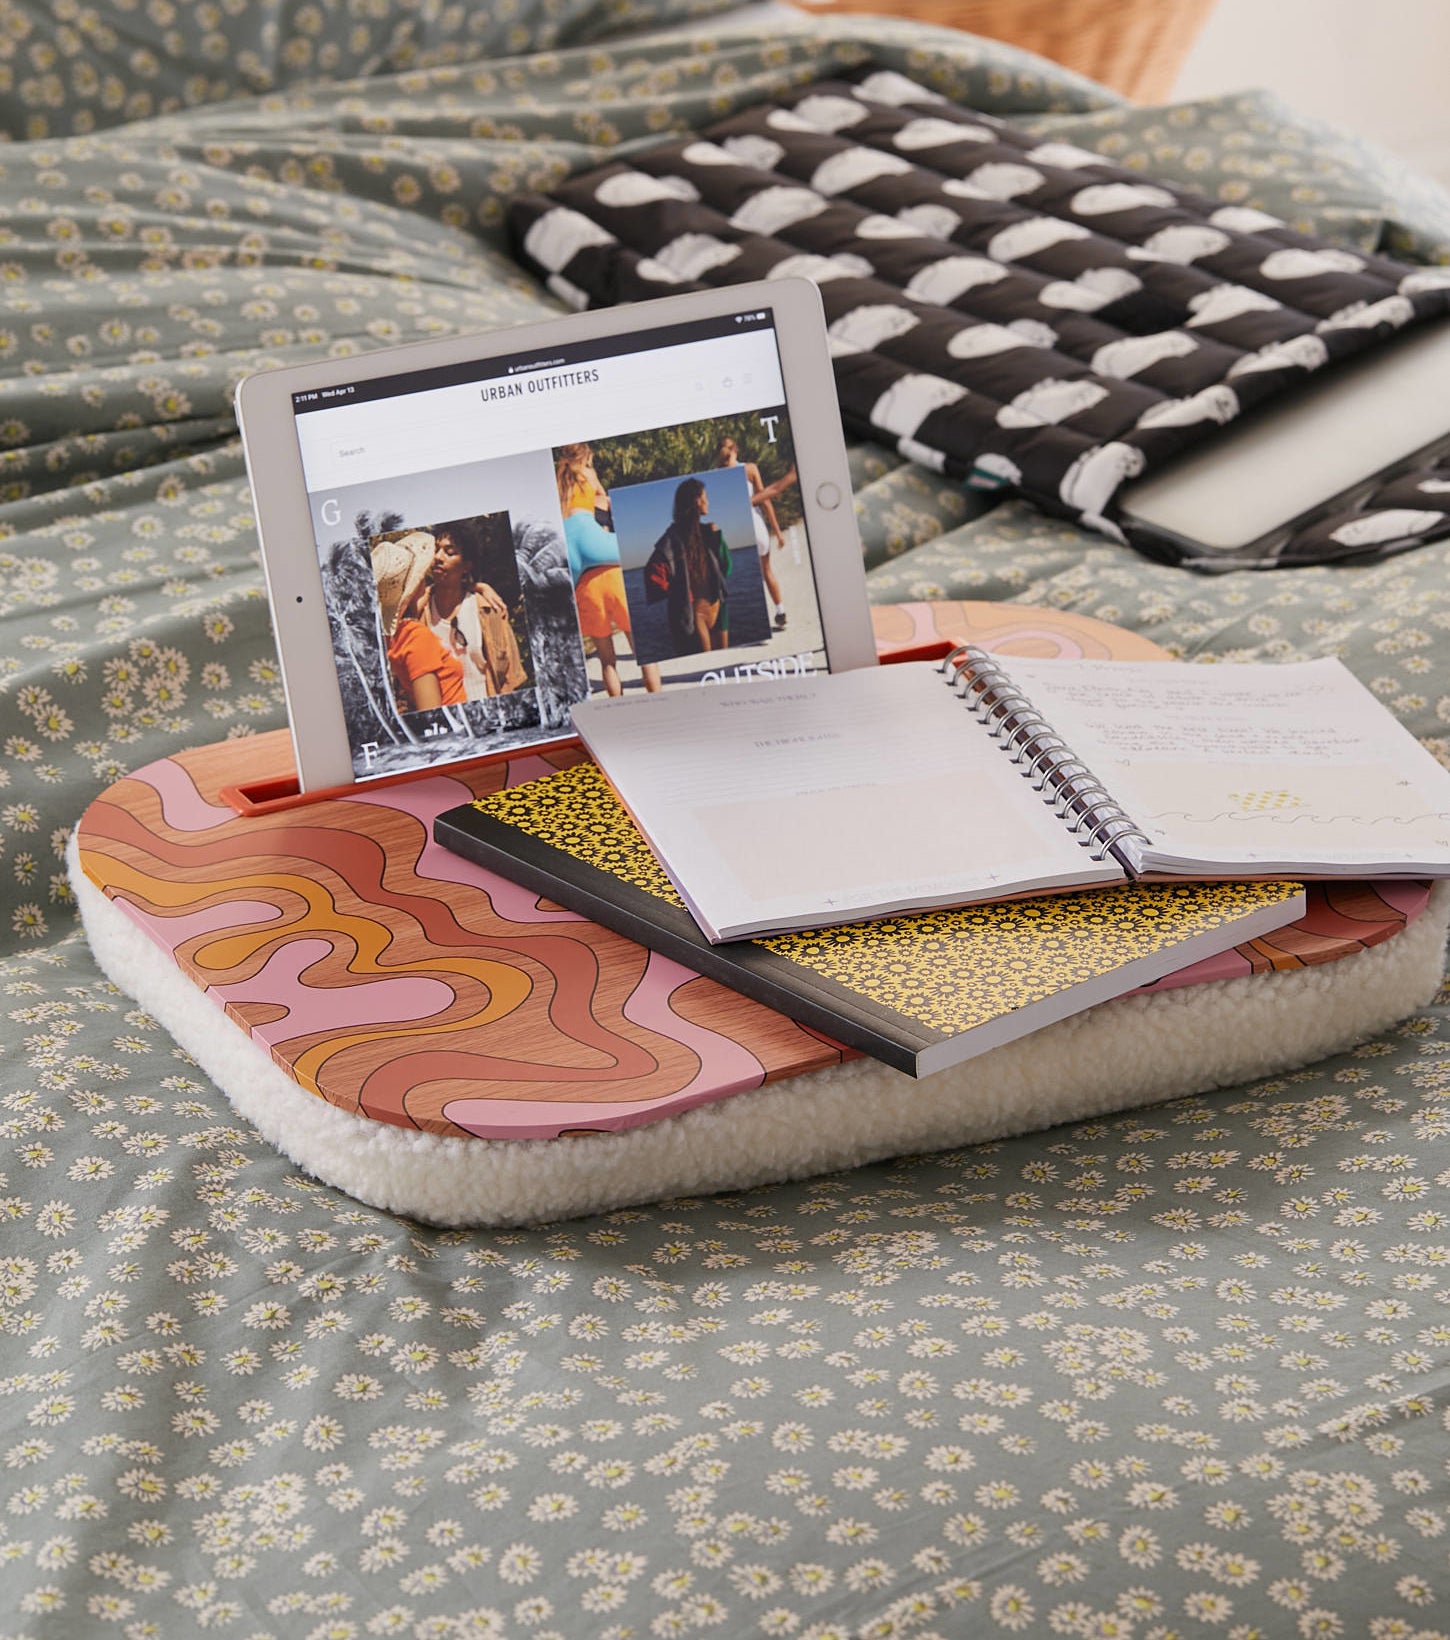 a cute lap desk with books and a tablet on it on a bed